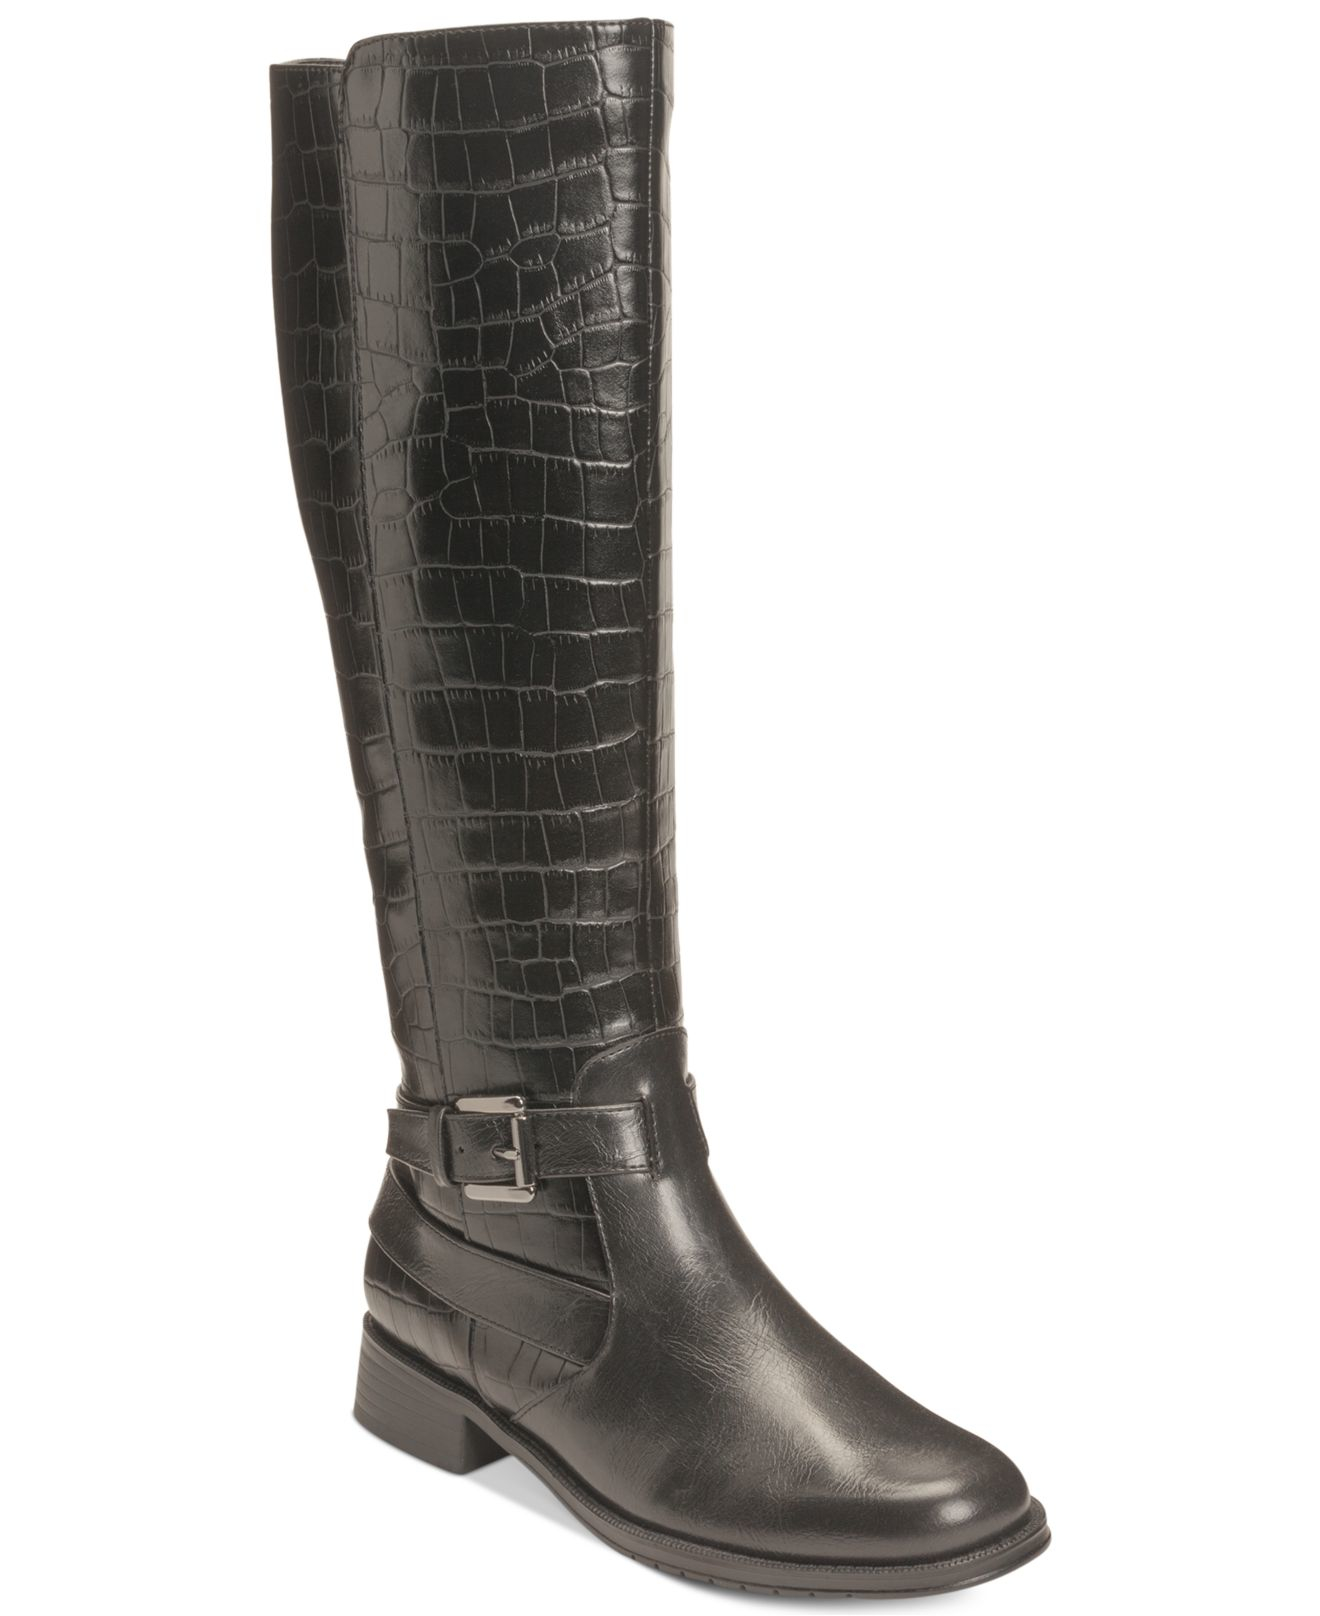 Aerosoles With Pride Tall Boots in Black - Lyst